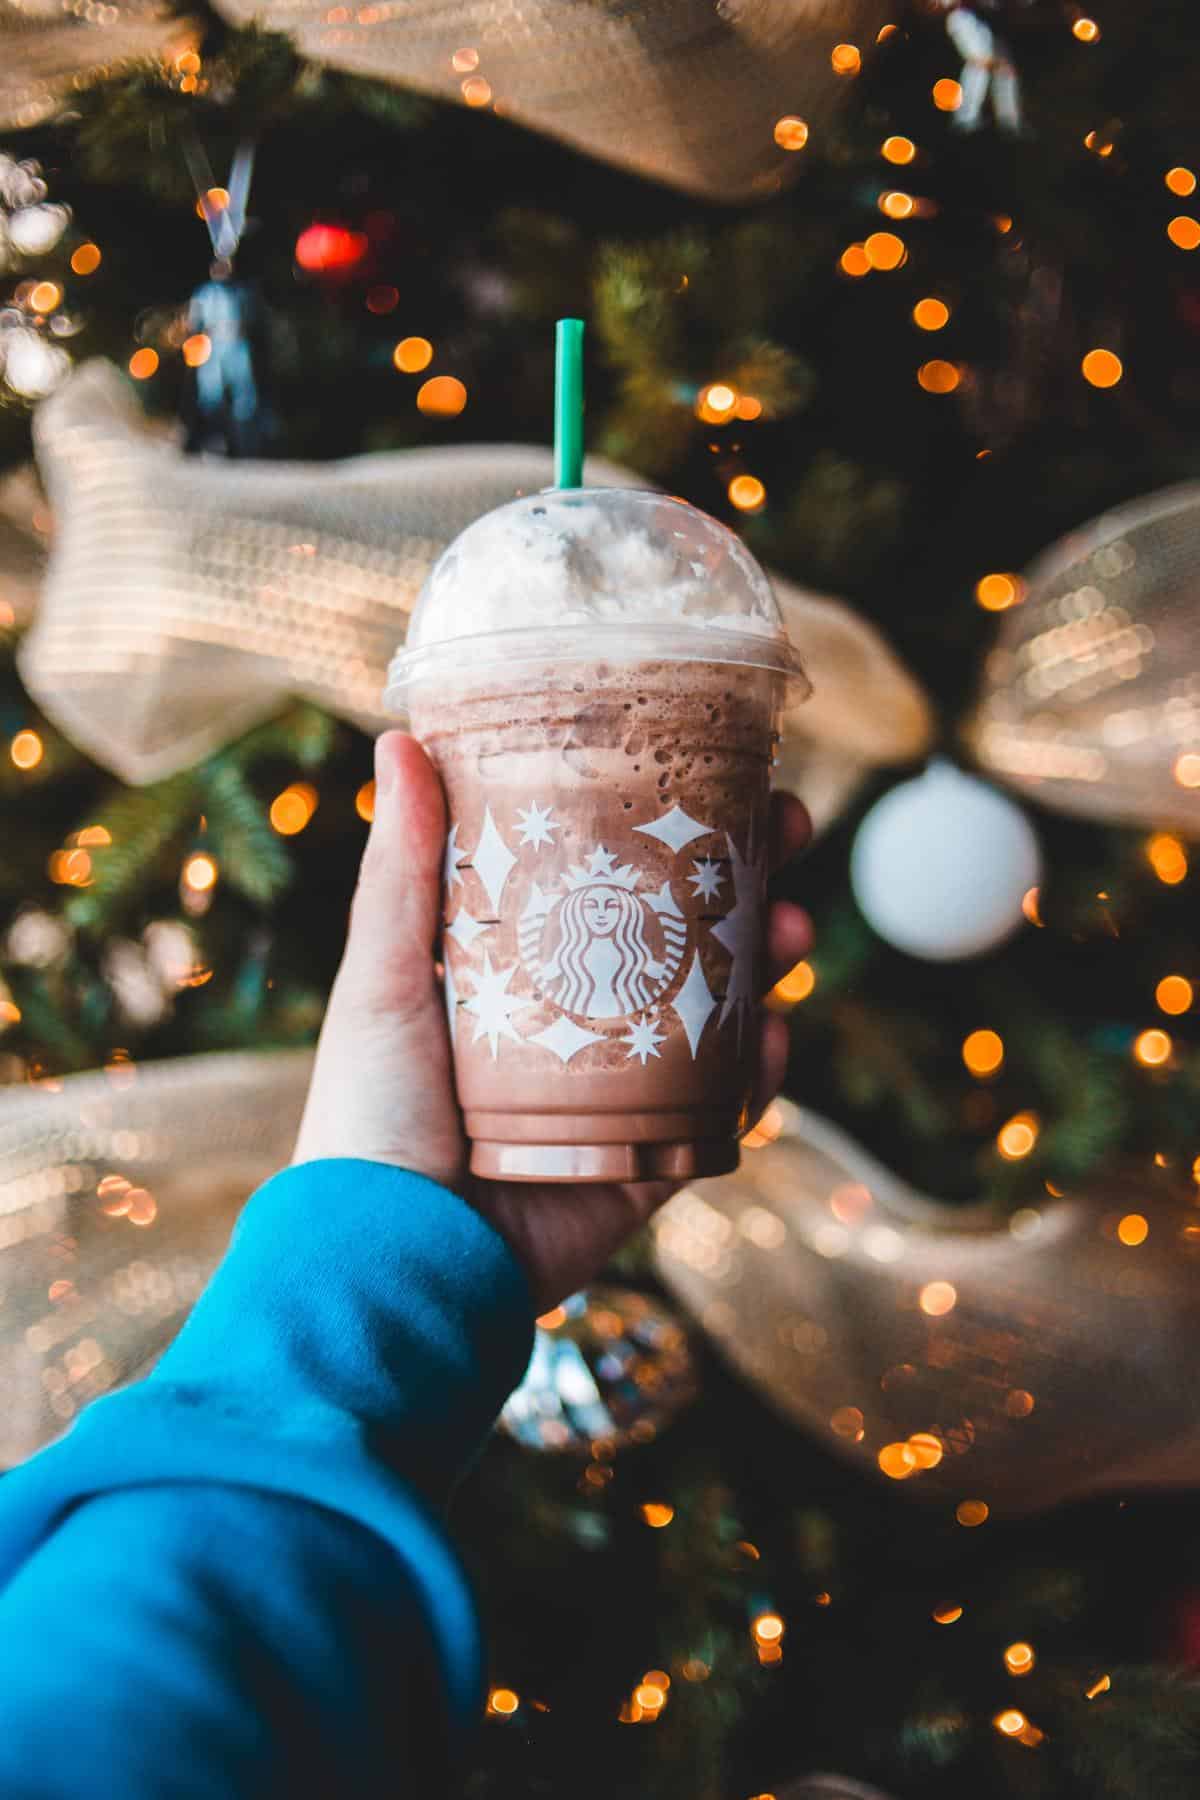 A Starbucks cup being held up infront of a Christmas tree.